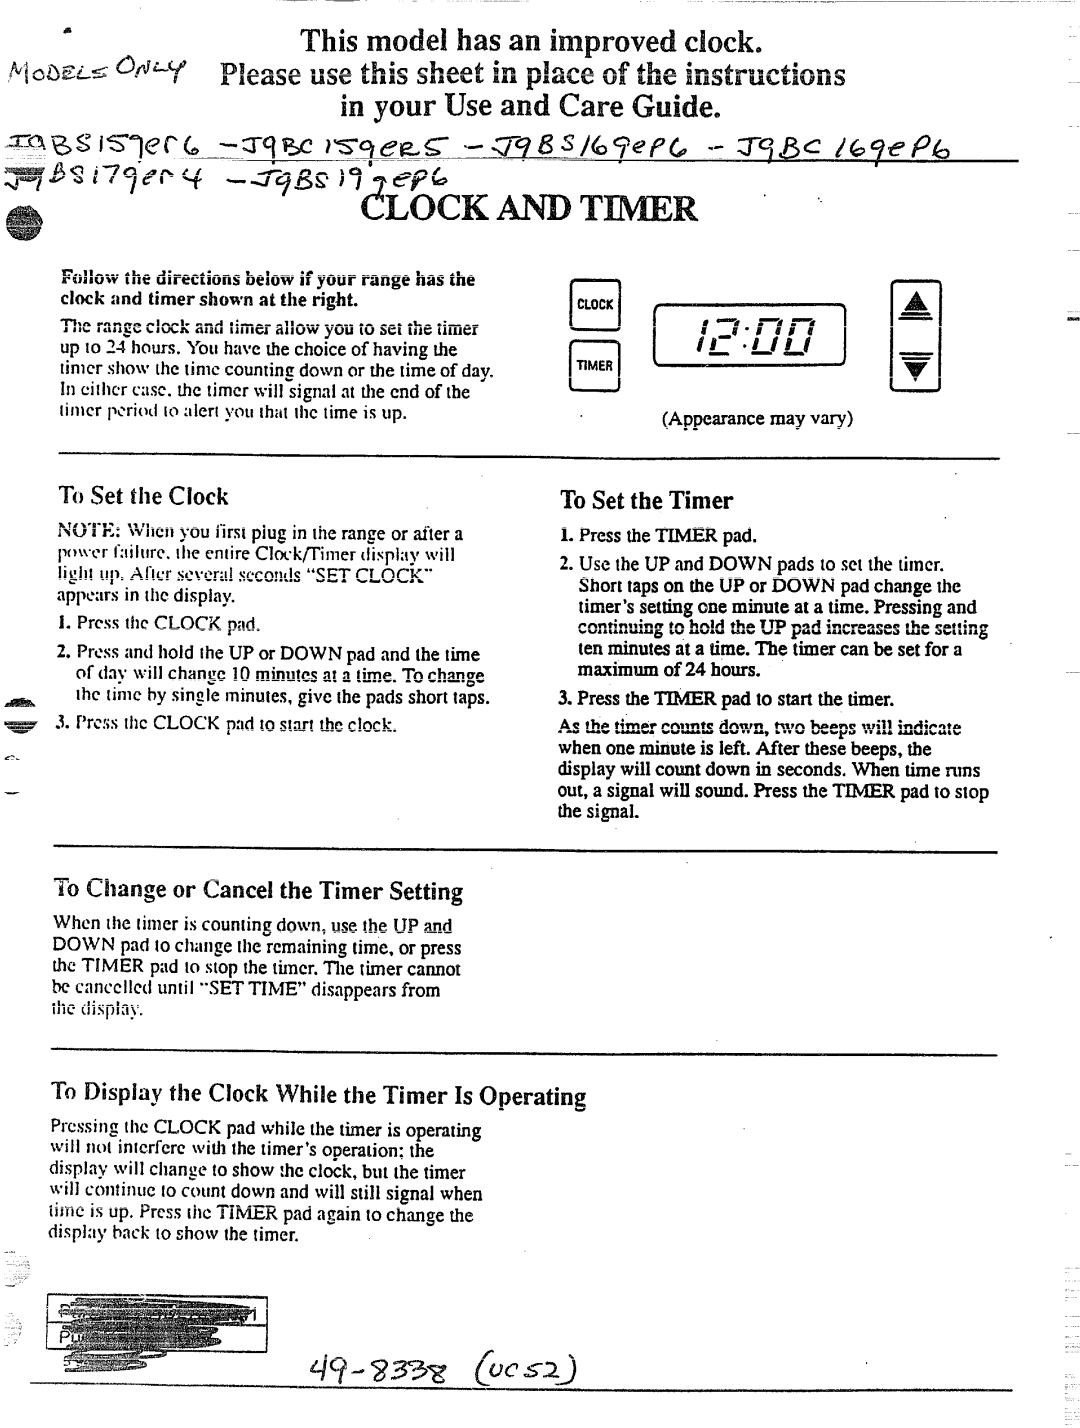 GE 49-8338 To Cilange or cancel the Timer setting, To Set the Timer, To Display tl~e Clock While tl~eTimer Is Operating 